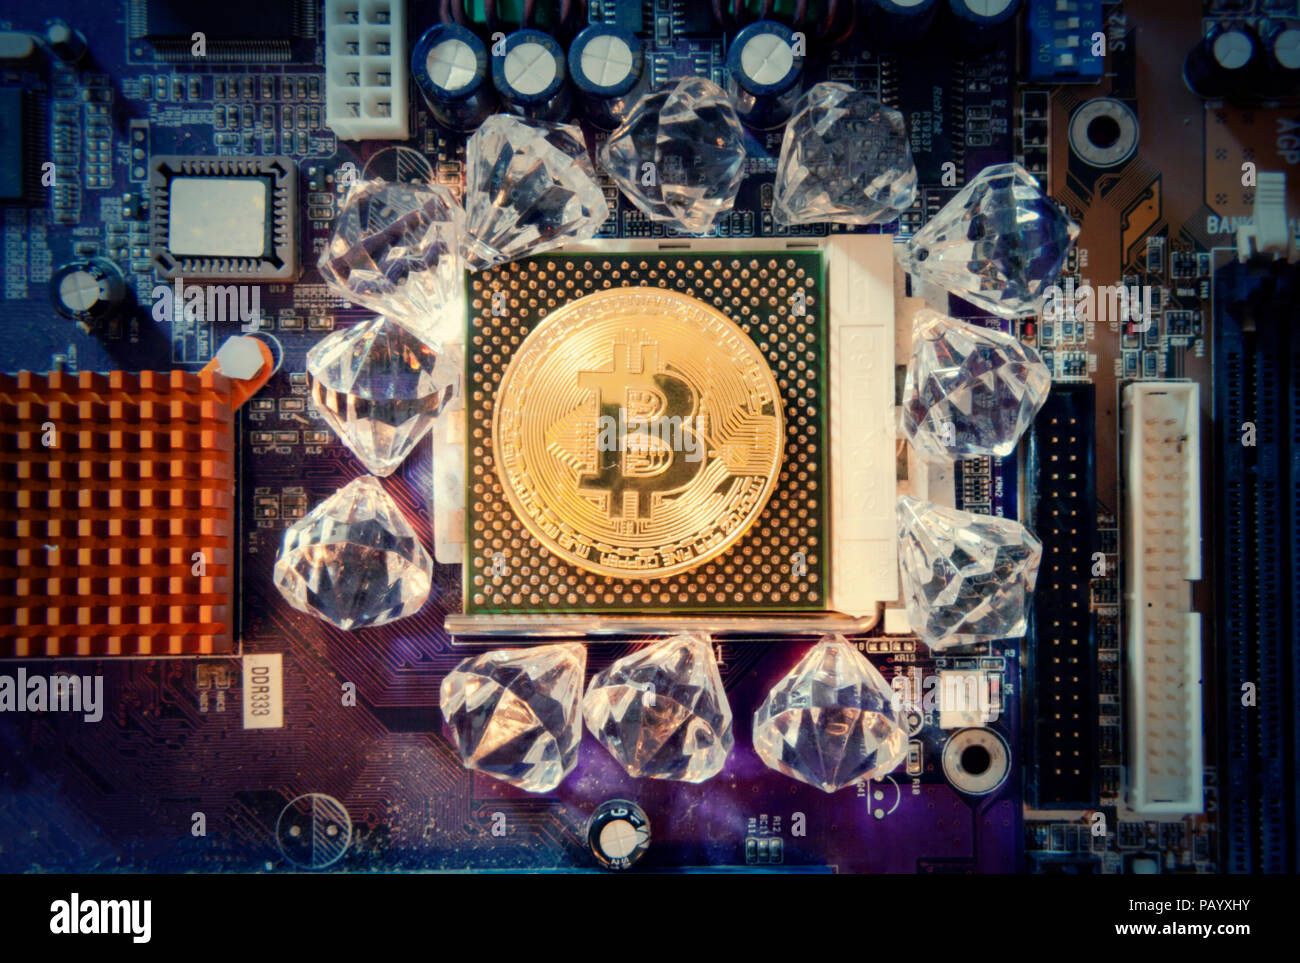 A big golden physical bitcoin (digital virtual crypto-currency) replacing a CPU on a motherboard, surrounded by shiny diamonds. Stock Photo